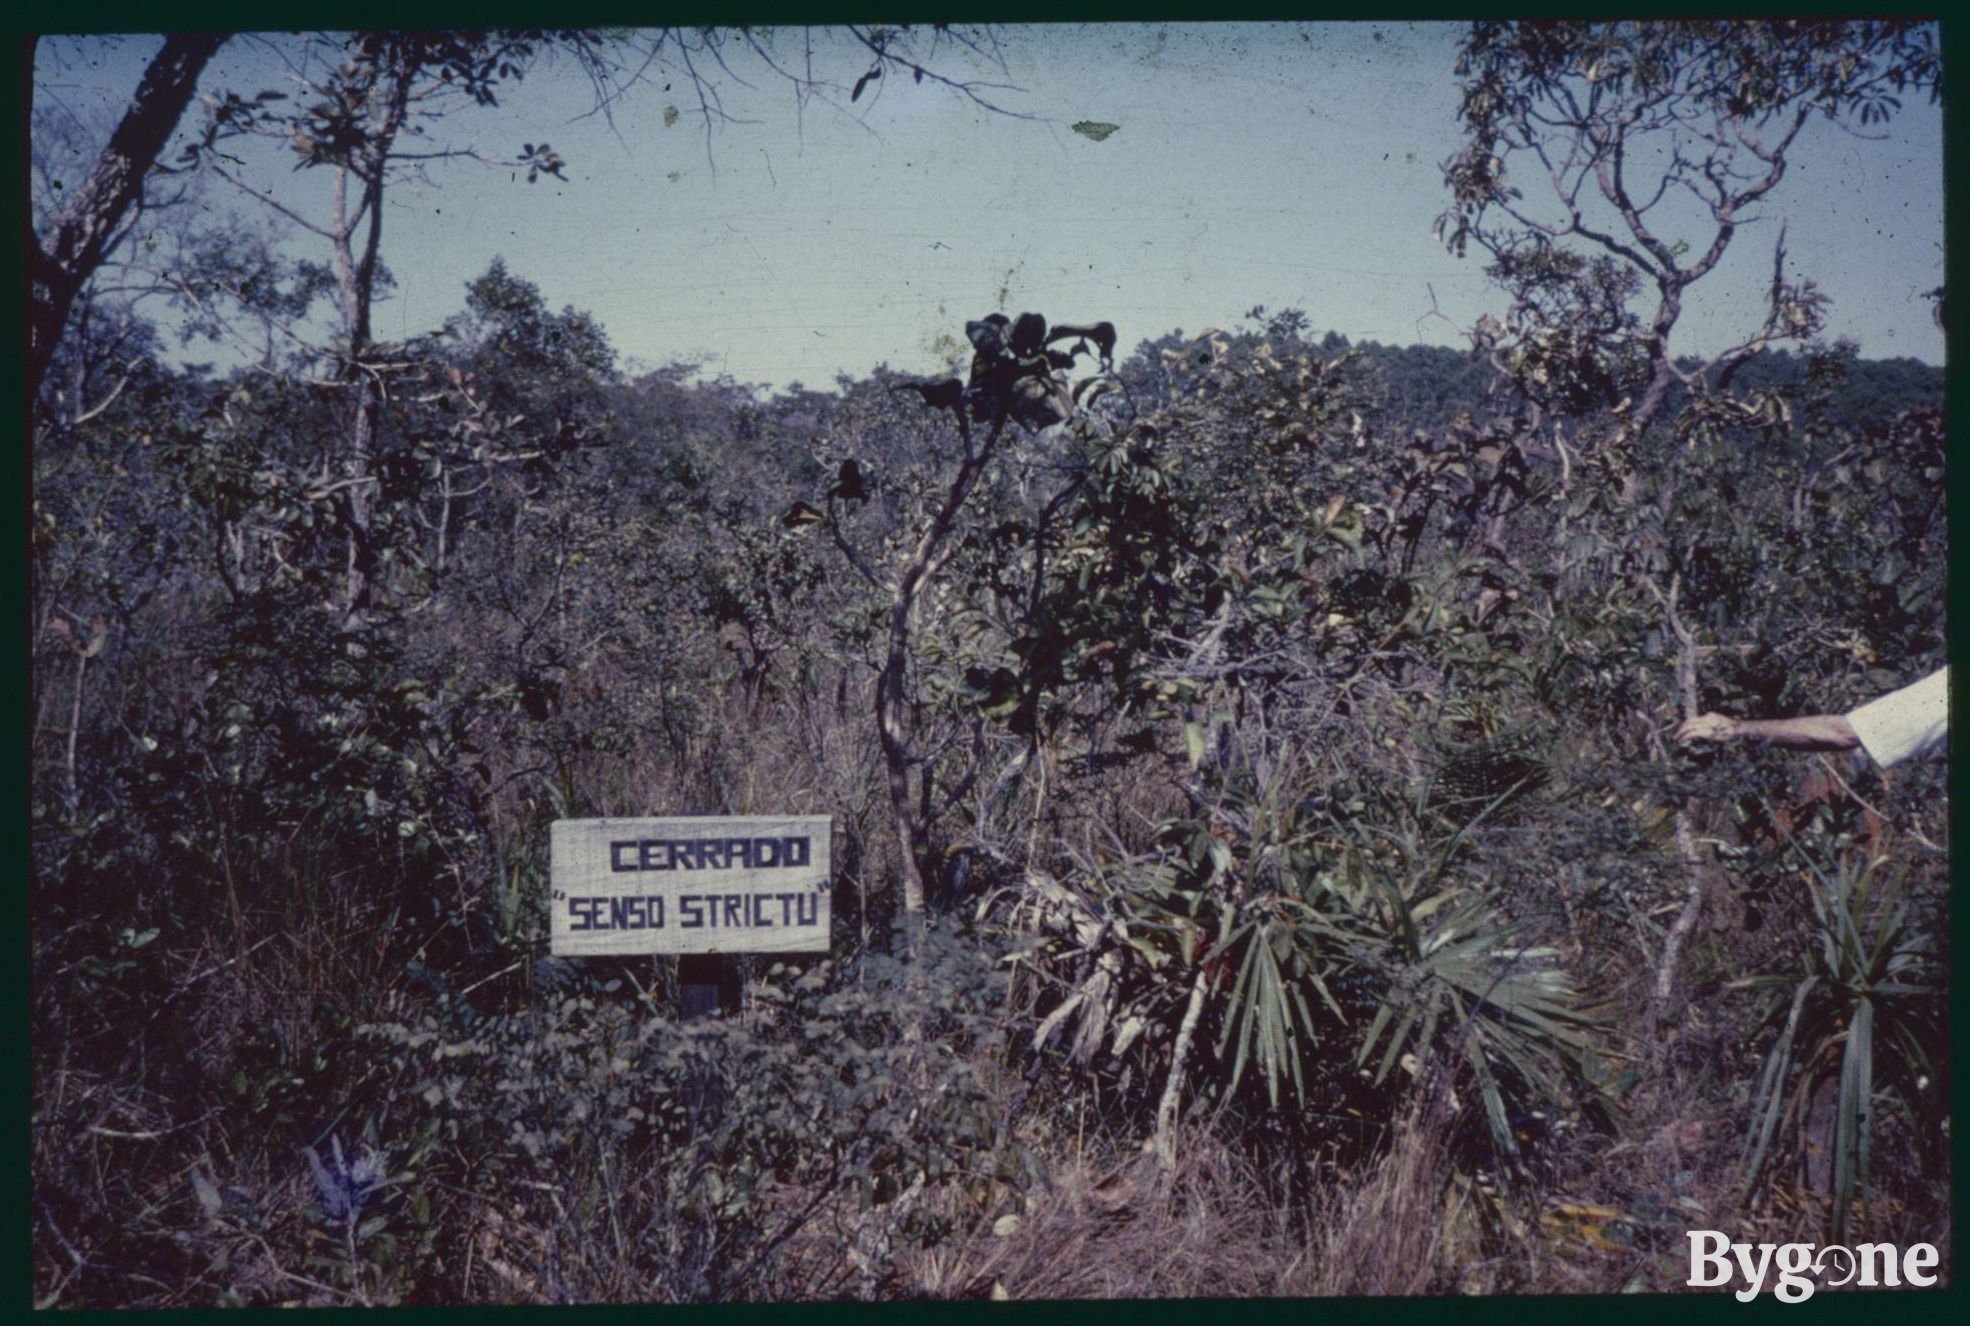 There is a mass of small trees, bushes, shrubs and long grass overgrowing. A small wooden sign sits in the lower left of the frame amongst the greenery that reads Cerrado, “senso strictu.”